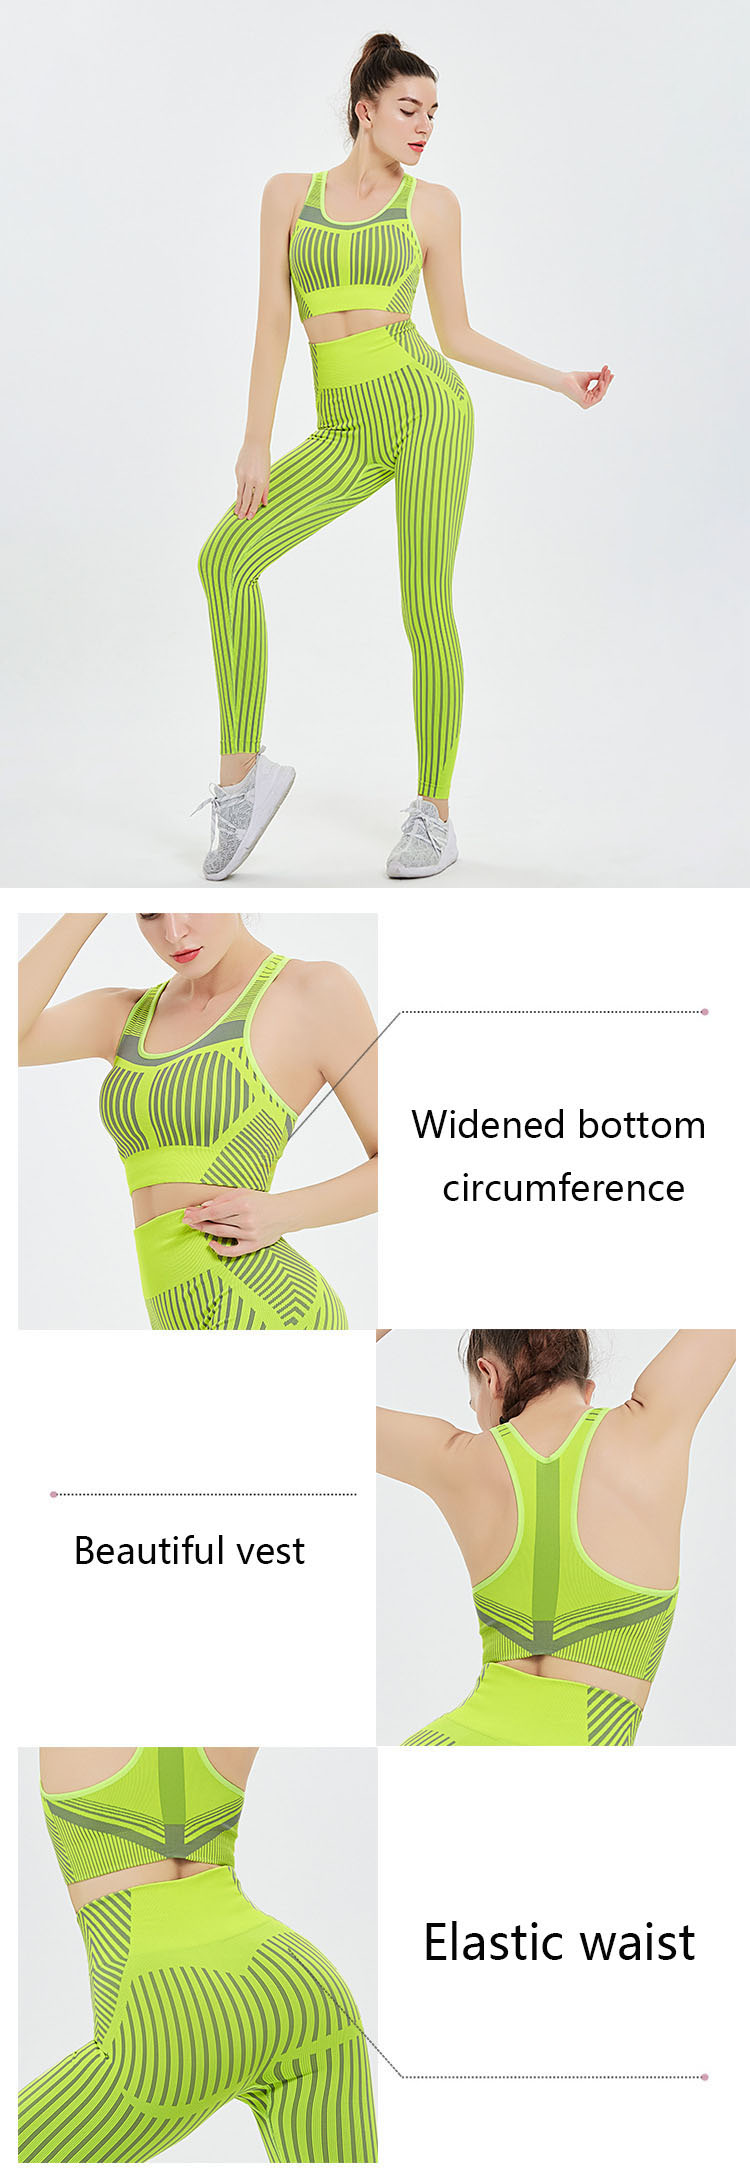 As a classic single product, ripple yoga wear are constantly updated